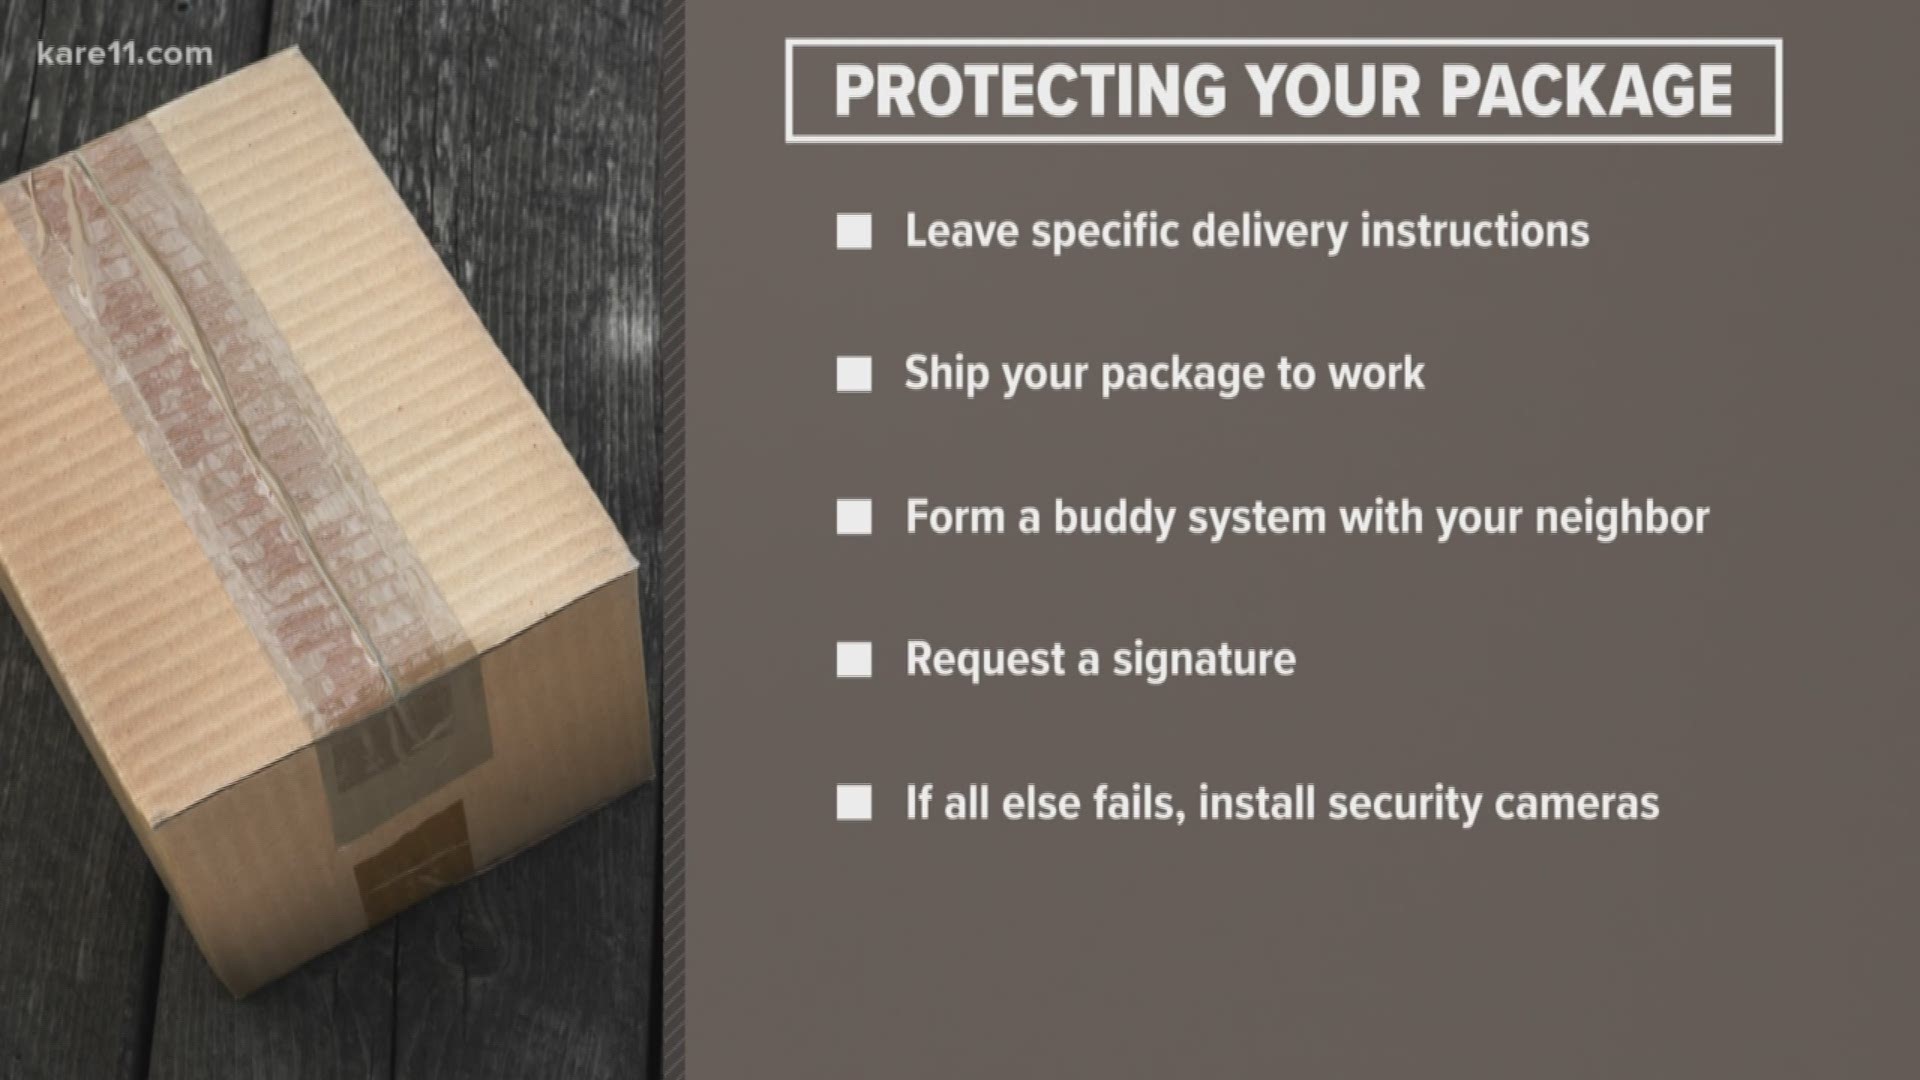 Here's a link to 11 tips for protecting your holiday packages. https://kare11.tv/2zxlRHF